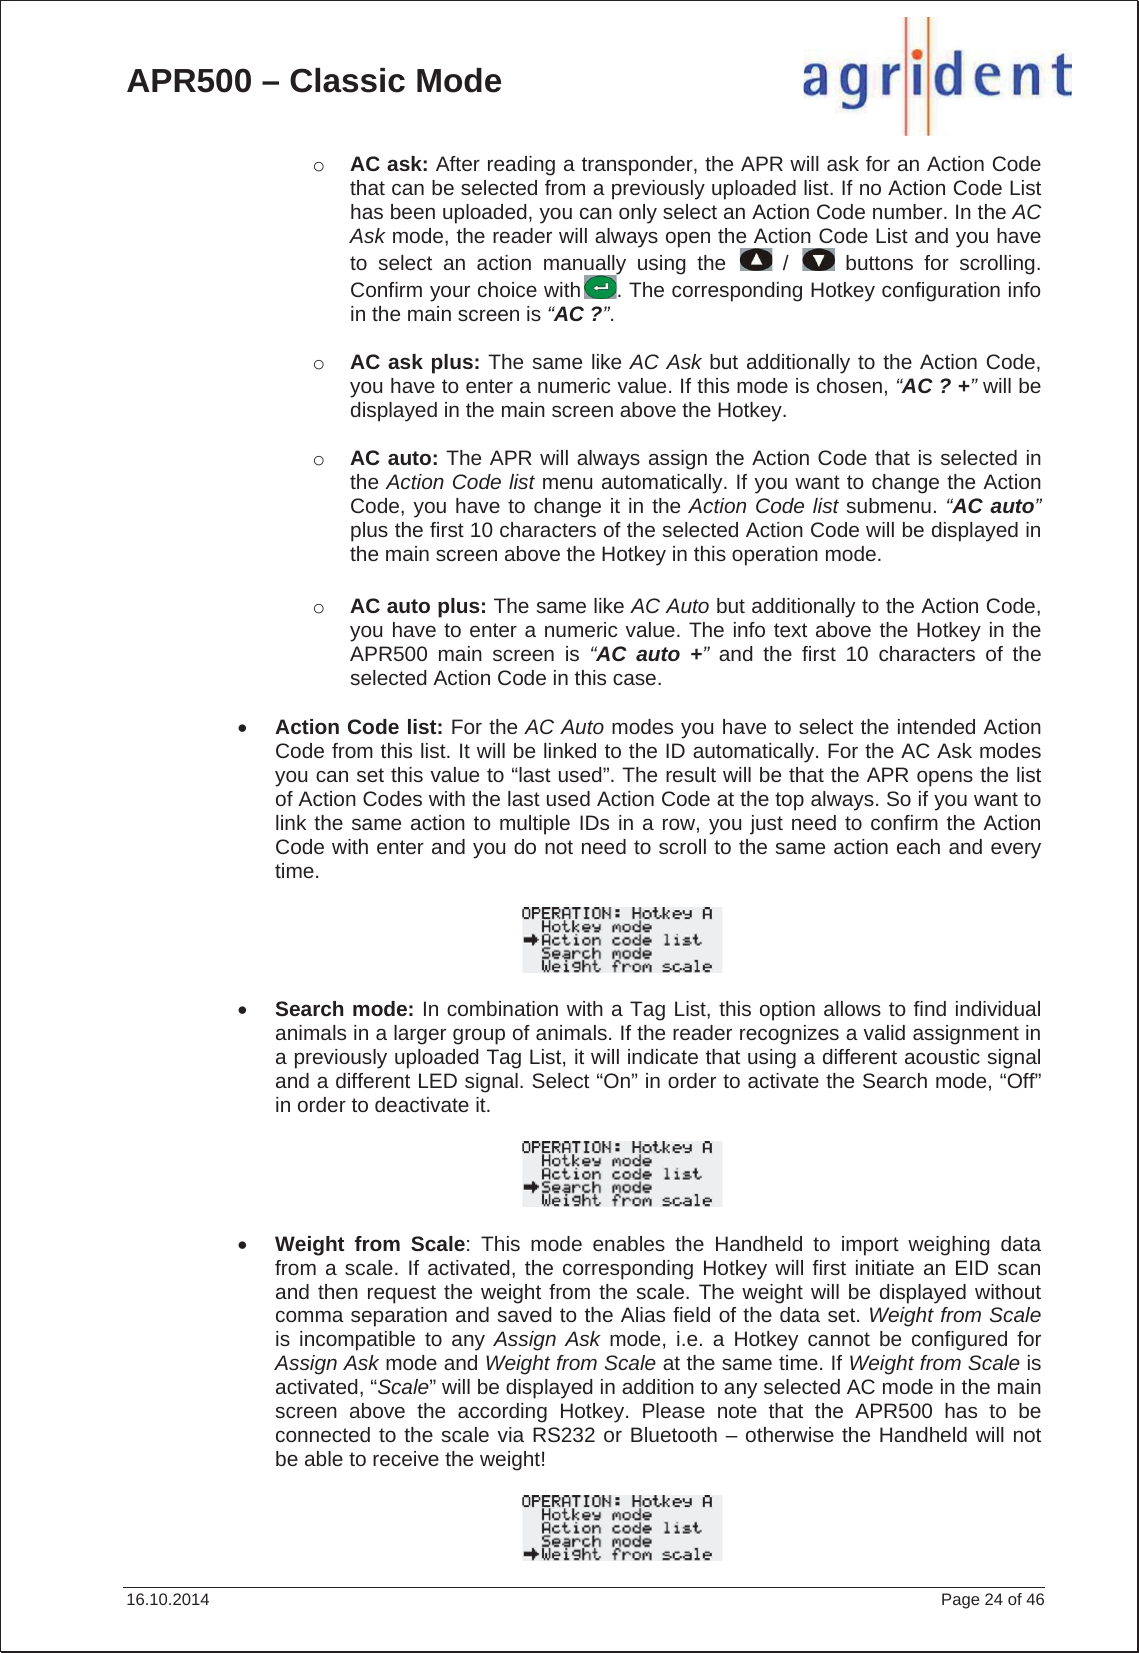 APR500 – Classic Mode 16.10.2014    Page 24 of 46 oAC ask: After reading a transponder, the APR will ask for an Action Code that can be selected from a previously uploaded list. If no Action Code List has been uploaded, you can only select an Action Code number. In the AC Ask mode, the reader will always open the Action Code List and you have to select an action manually using the   /   buttons for scrolling. Confirm your choice with . The corresponding Hotkey configuration info in the main screen is “AC ?”.oAC ask plus: The same like AC Ask but additionally to the Action Code, you have to enter a numeric value. If this mode is chosen, “AC ? +”will be displayed in the main screen above the Hotkey. oAC auto: The APR will always assign the Action Code that is selected in the Action Code list menu automatically. If you want to change the Action Code, you have to change it in the Action Code list submenu. “AC auto”plus the first 10 characters of the selected Action Code will be displayed in the main screen above the Hotkey in this operation mode. oAC auto plus: The same like AC Auto but additionally to the Action Code, you have to enter a numeric value. The info text above the Hotkey in the APR500 main screen is “AC auto +”and the first 10 characters of the selected Action Code in this case.xAction Code list: For the AC Auto modes you have to select the intended Action Code from this list. It will be linked to the ID automatically. For the AC Ask modes you can set this value to “last used”. The result will be that the APR opens the list of Action Codes with the last used Action Code at the top always. So if you want to link the same action to multiple IDs in a row, you just need to confirm the Action Code with enter and you do not need to scroll to the same action each and every time.xSearch mode: In combination with a Tag List, this option allows to find individual animals in a larger group of animals. If the reader recognizes a valid assignment in a previously uploaded Tag List, it will indicate that using a different acoustic signal and a different LED signal. Select “On” in order to activate the Search mode, “Off” in order to deactivate it. xWeight from Scale: This mode enables the Handheld to import weighing data from a scale. If activated, the corresponding Hotkey will first initiate an EID scan and then request the weight from the scale. The weight will be displayed without comma separation and saved to the Alias field of the data set. Weight from Scaleis incompatible to any Assign Ask mode, i.e. a Hotkey cannot be configured for Assign Ask mode and Weight from Scale at the same time. If Weight from Scale is activated, “Scale” will be displayed in addition to any selected AC mode in the main screen above the according Hotkey. Please note that the APR500 has to be connected to the scale via RS232 or Bluetooth – otherwise the Handheld will not be able to receive the weight! 